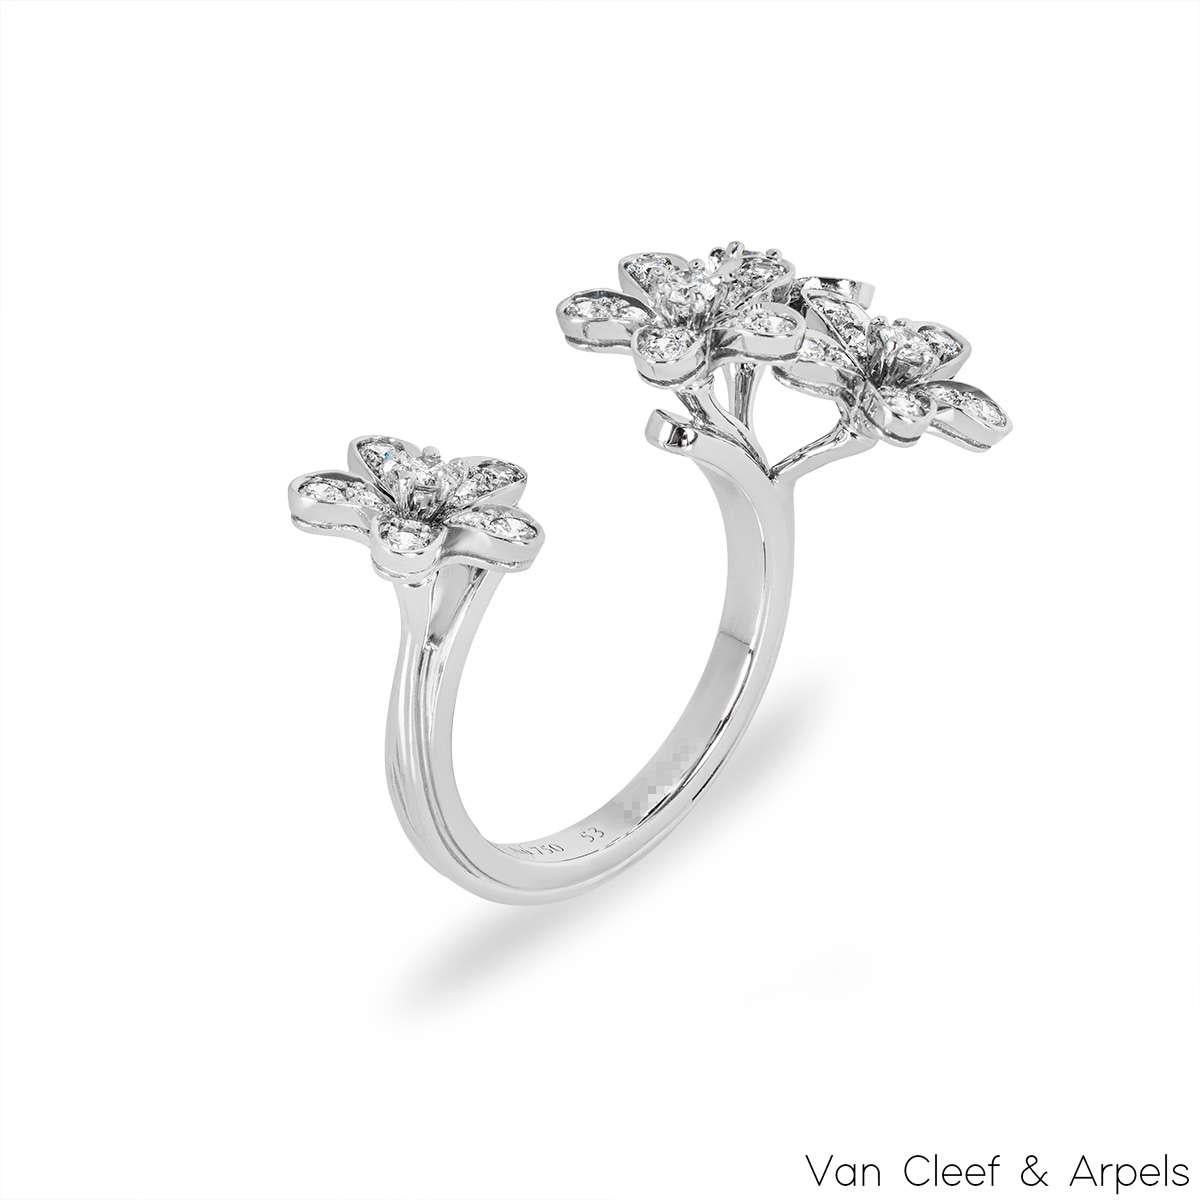 An exquisite 18k white gold diamond between the finger ring by Van Cleef & Arpels from the Socrate collection. The ring comprises of 3 diamond set floral motifs on one side and 1 diamond set floral motif on the other. The 44 round brilliant cut